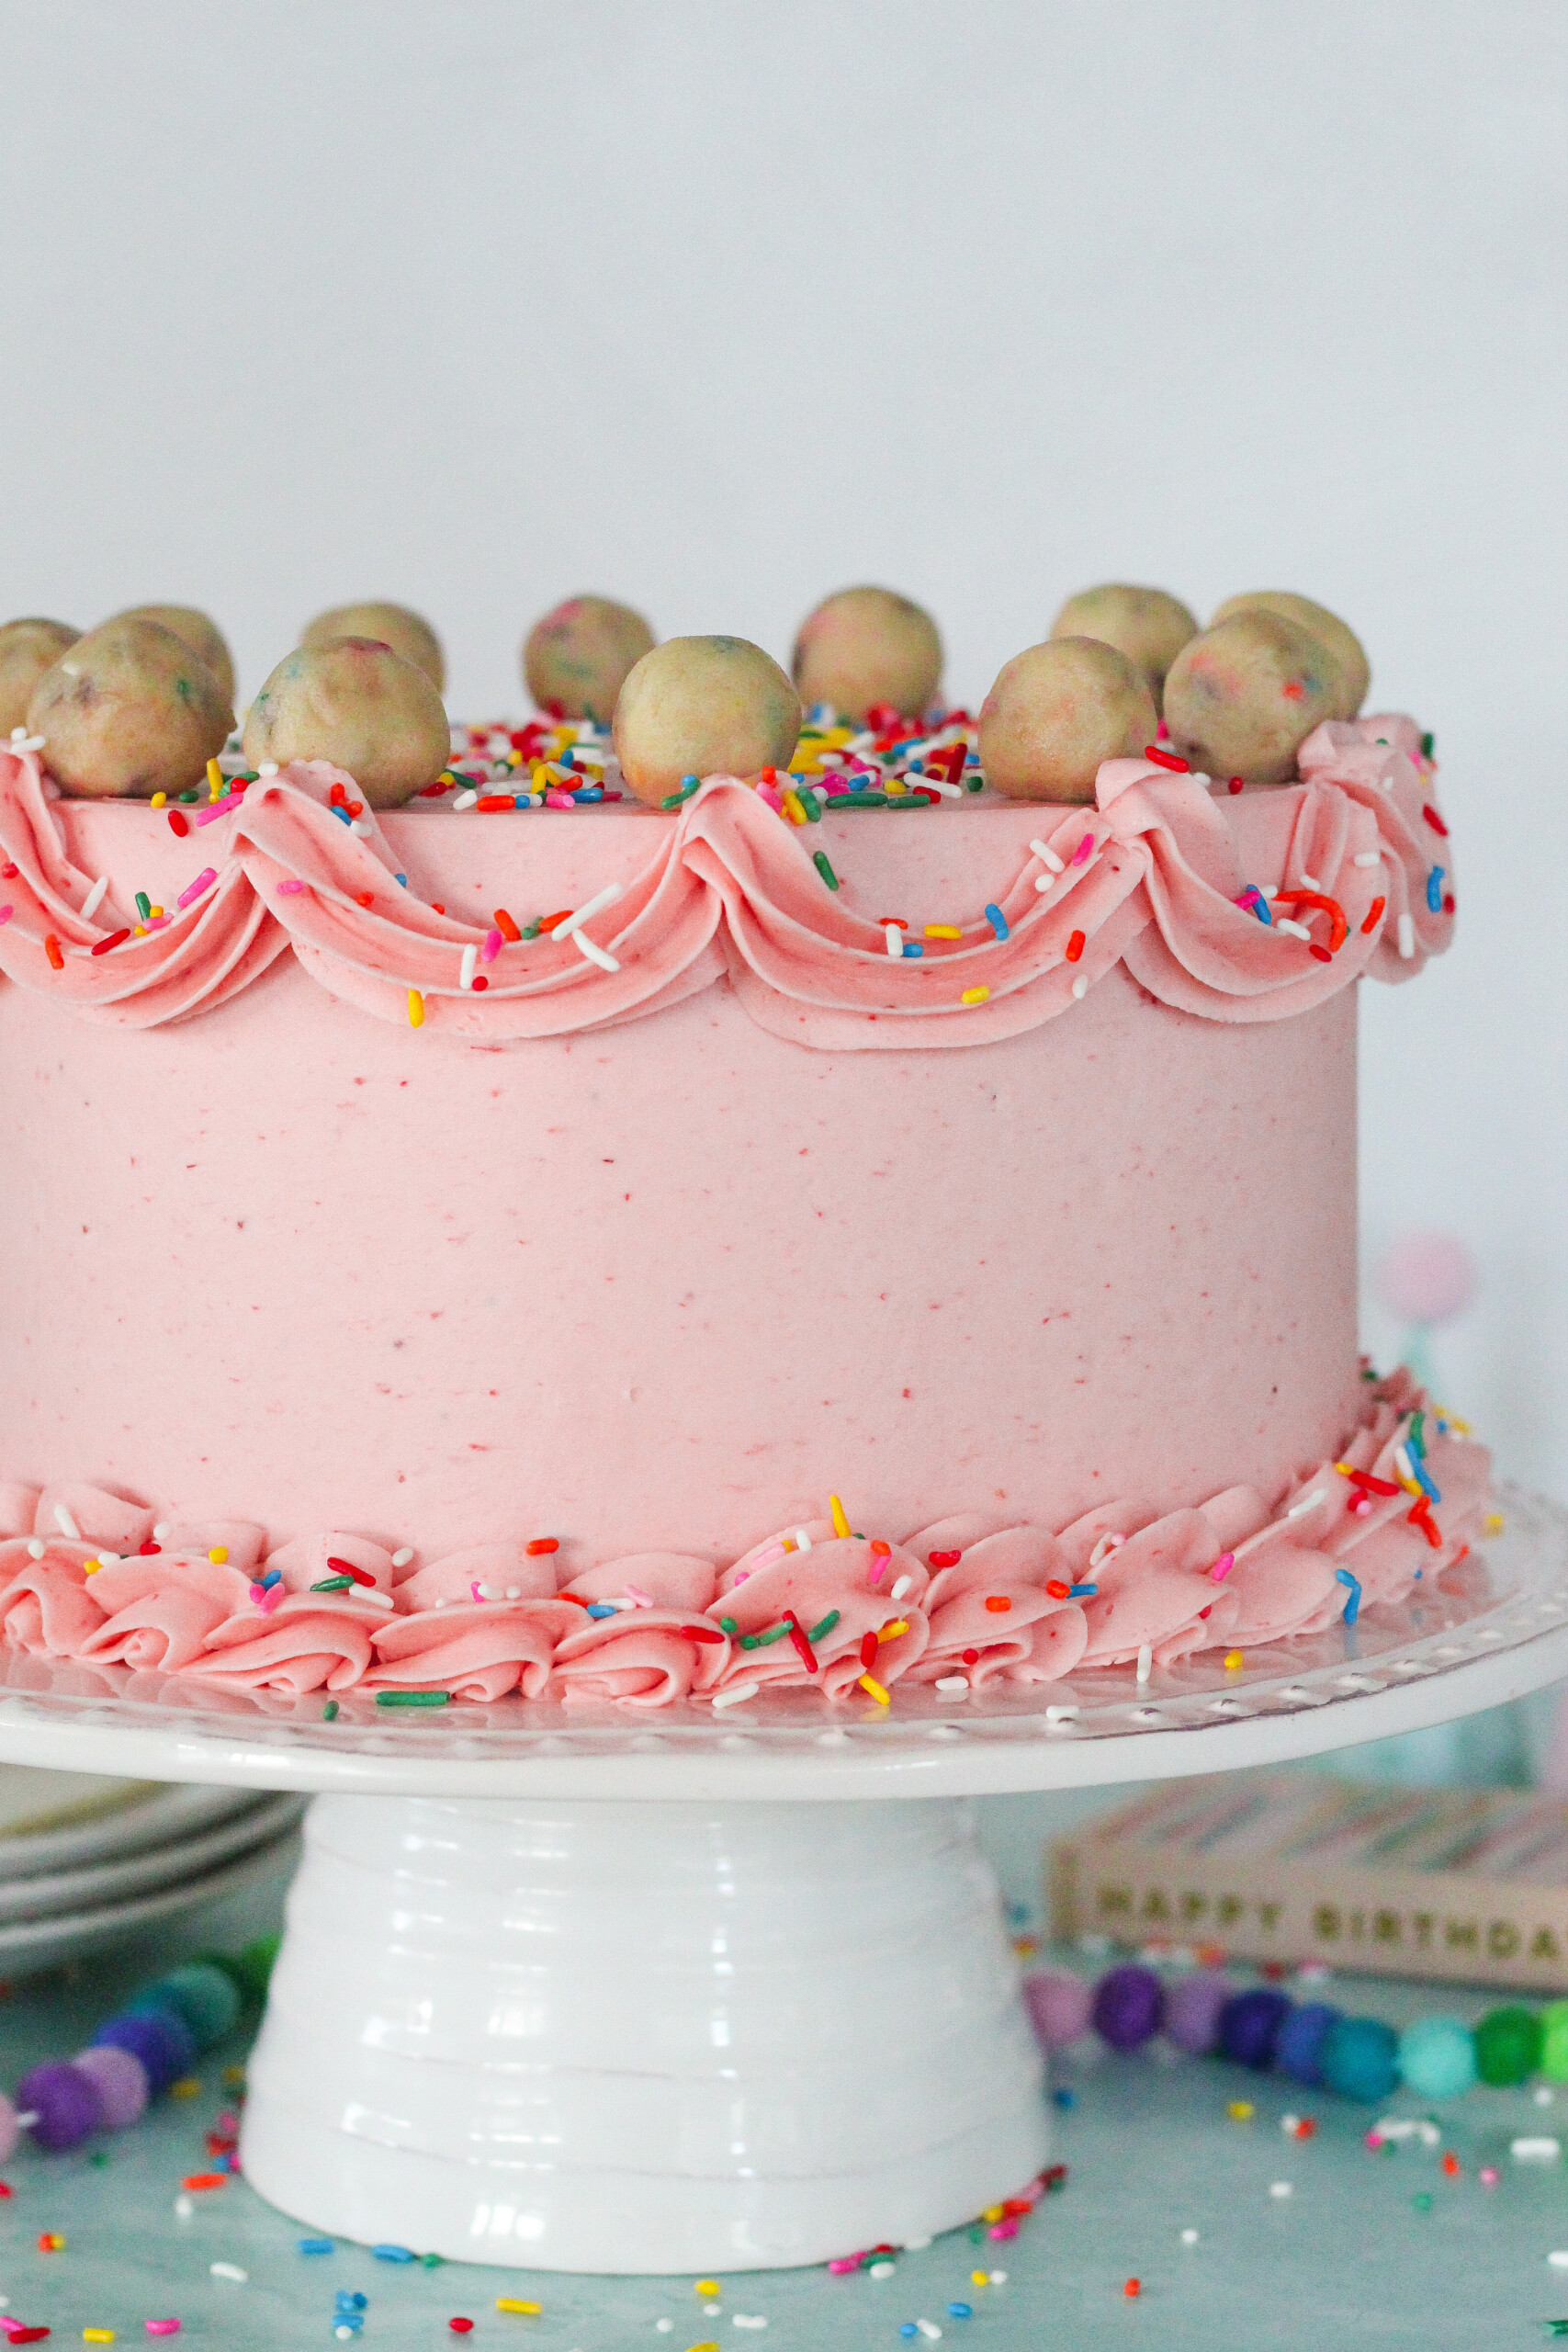 Pink cake with piping decorations on it.